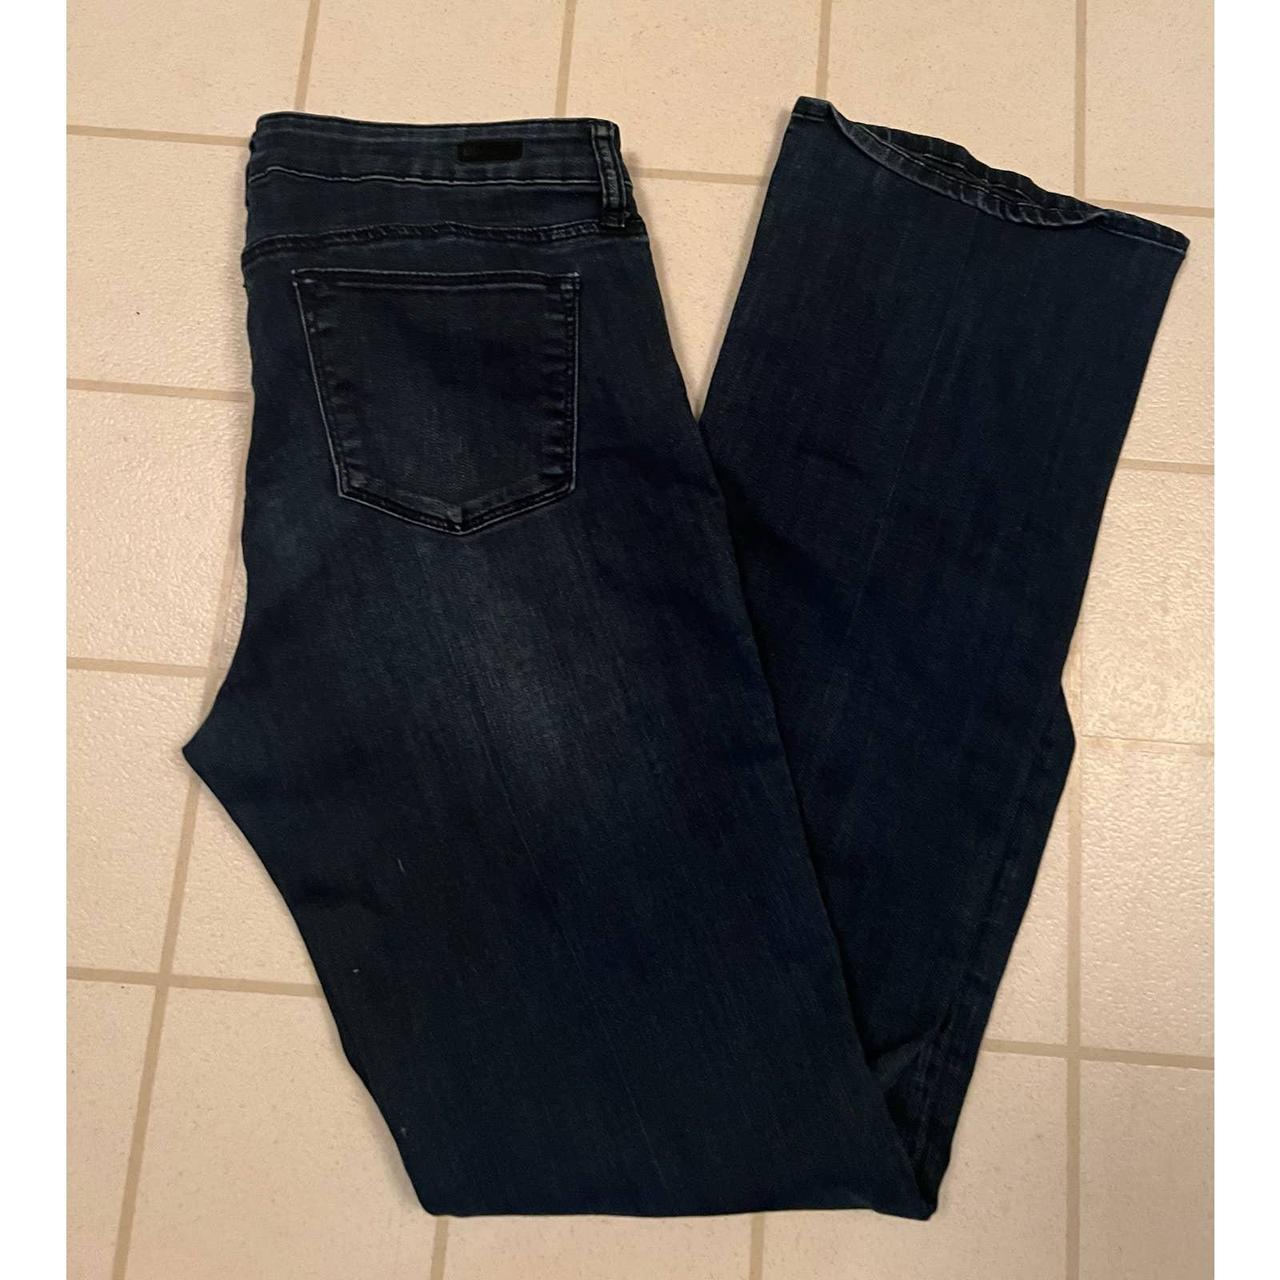 Kut from the cloth size 14 denim jeans. Very good... - Depop